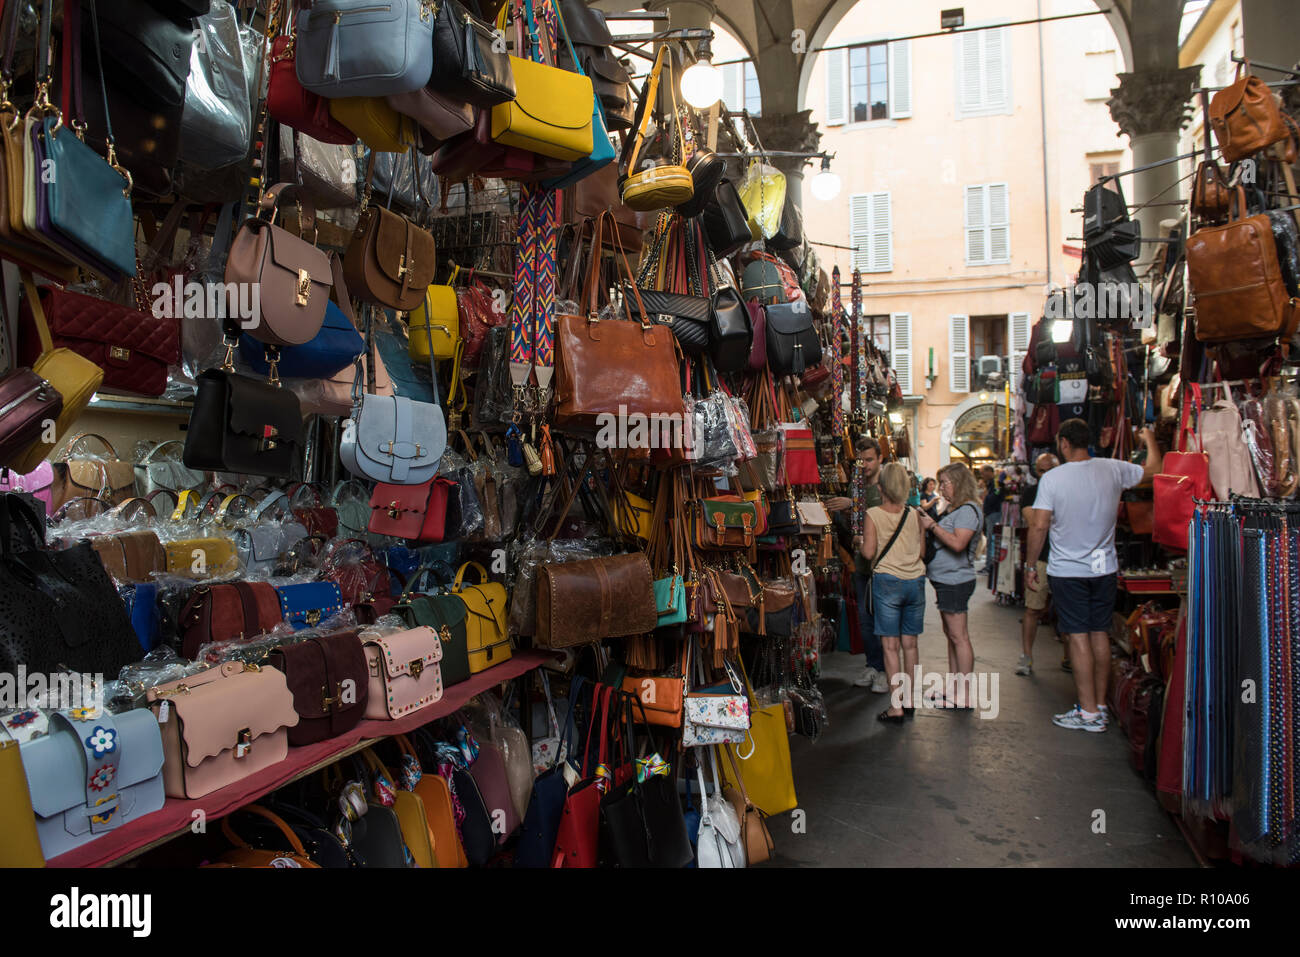 The Straw Market in Florence, Italy Europe Stock Photo